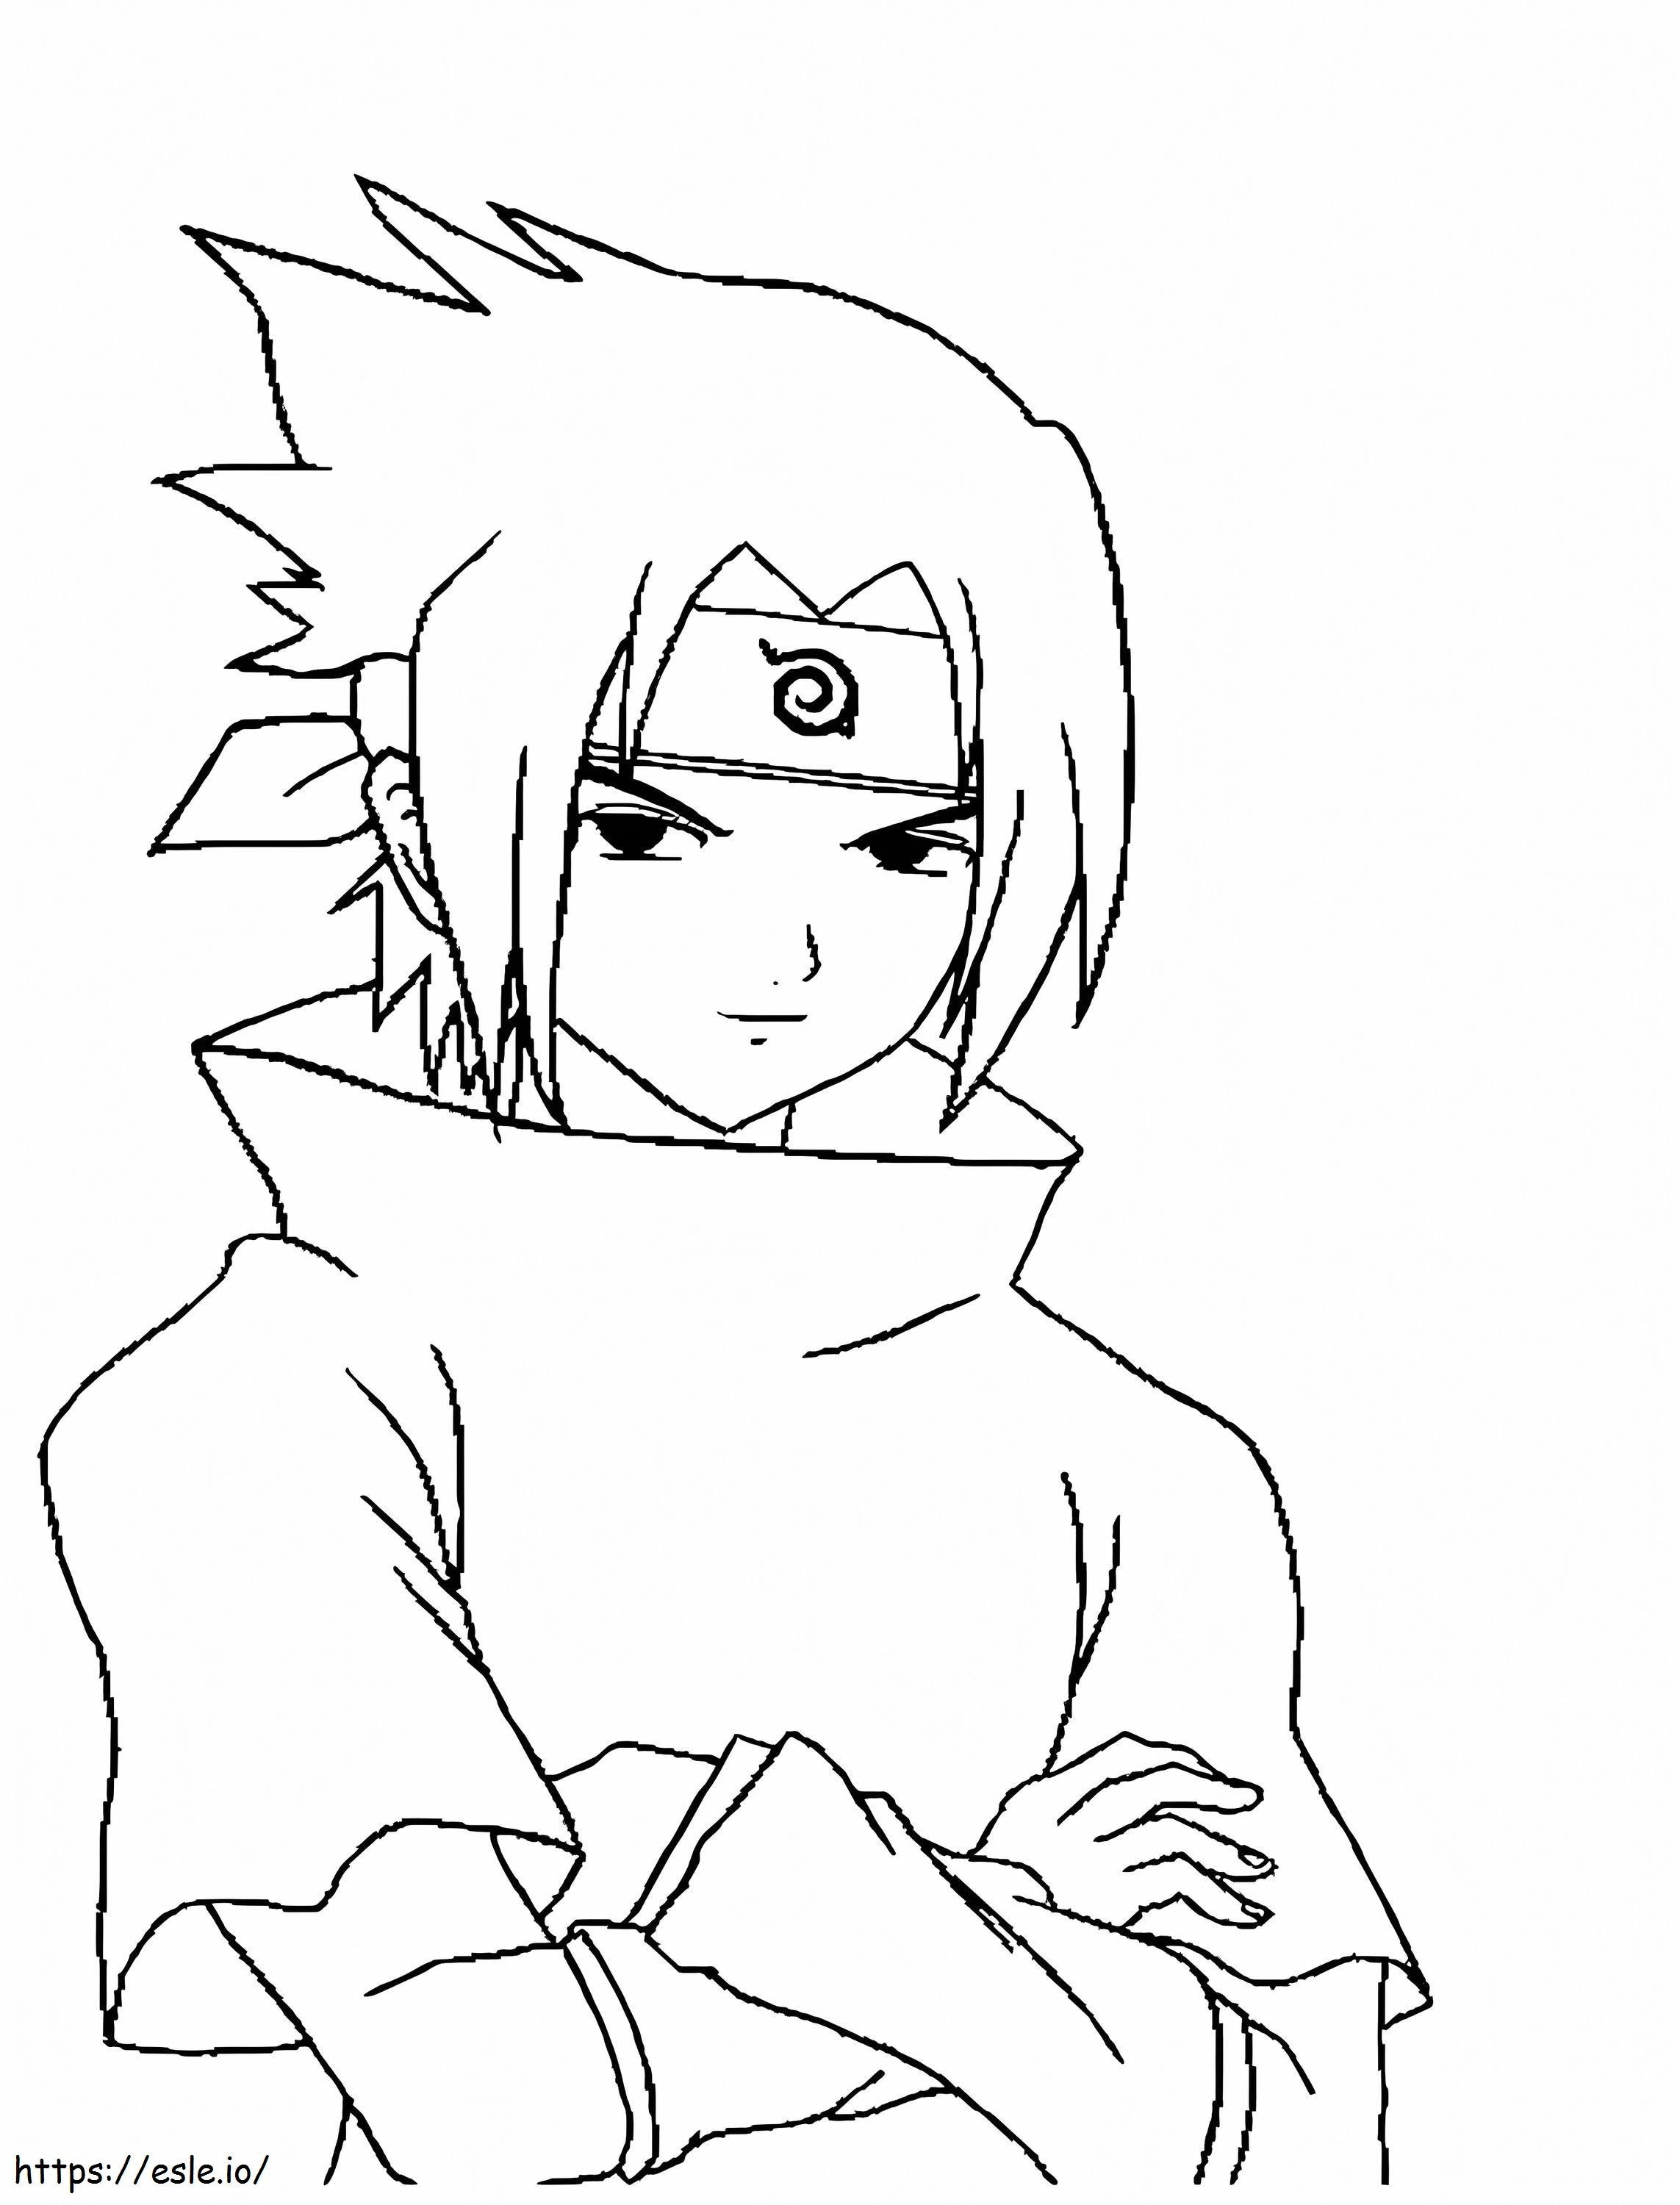 Sasuke'S Little Smiling Face coloring page